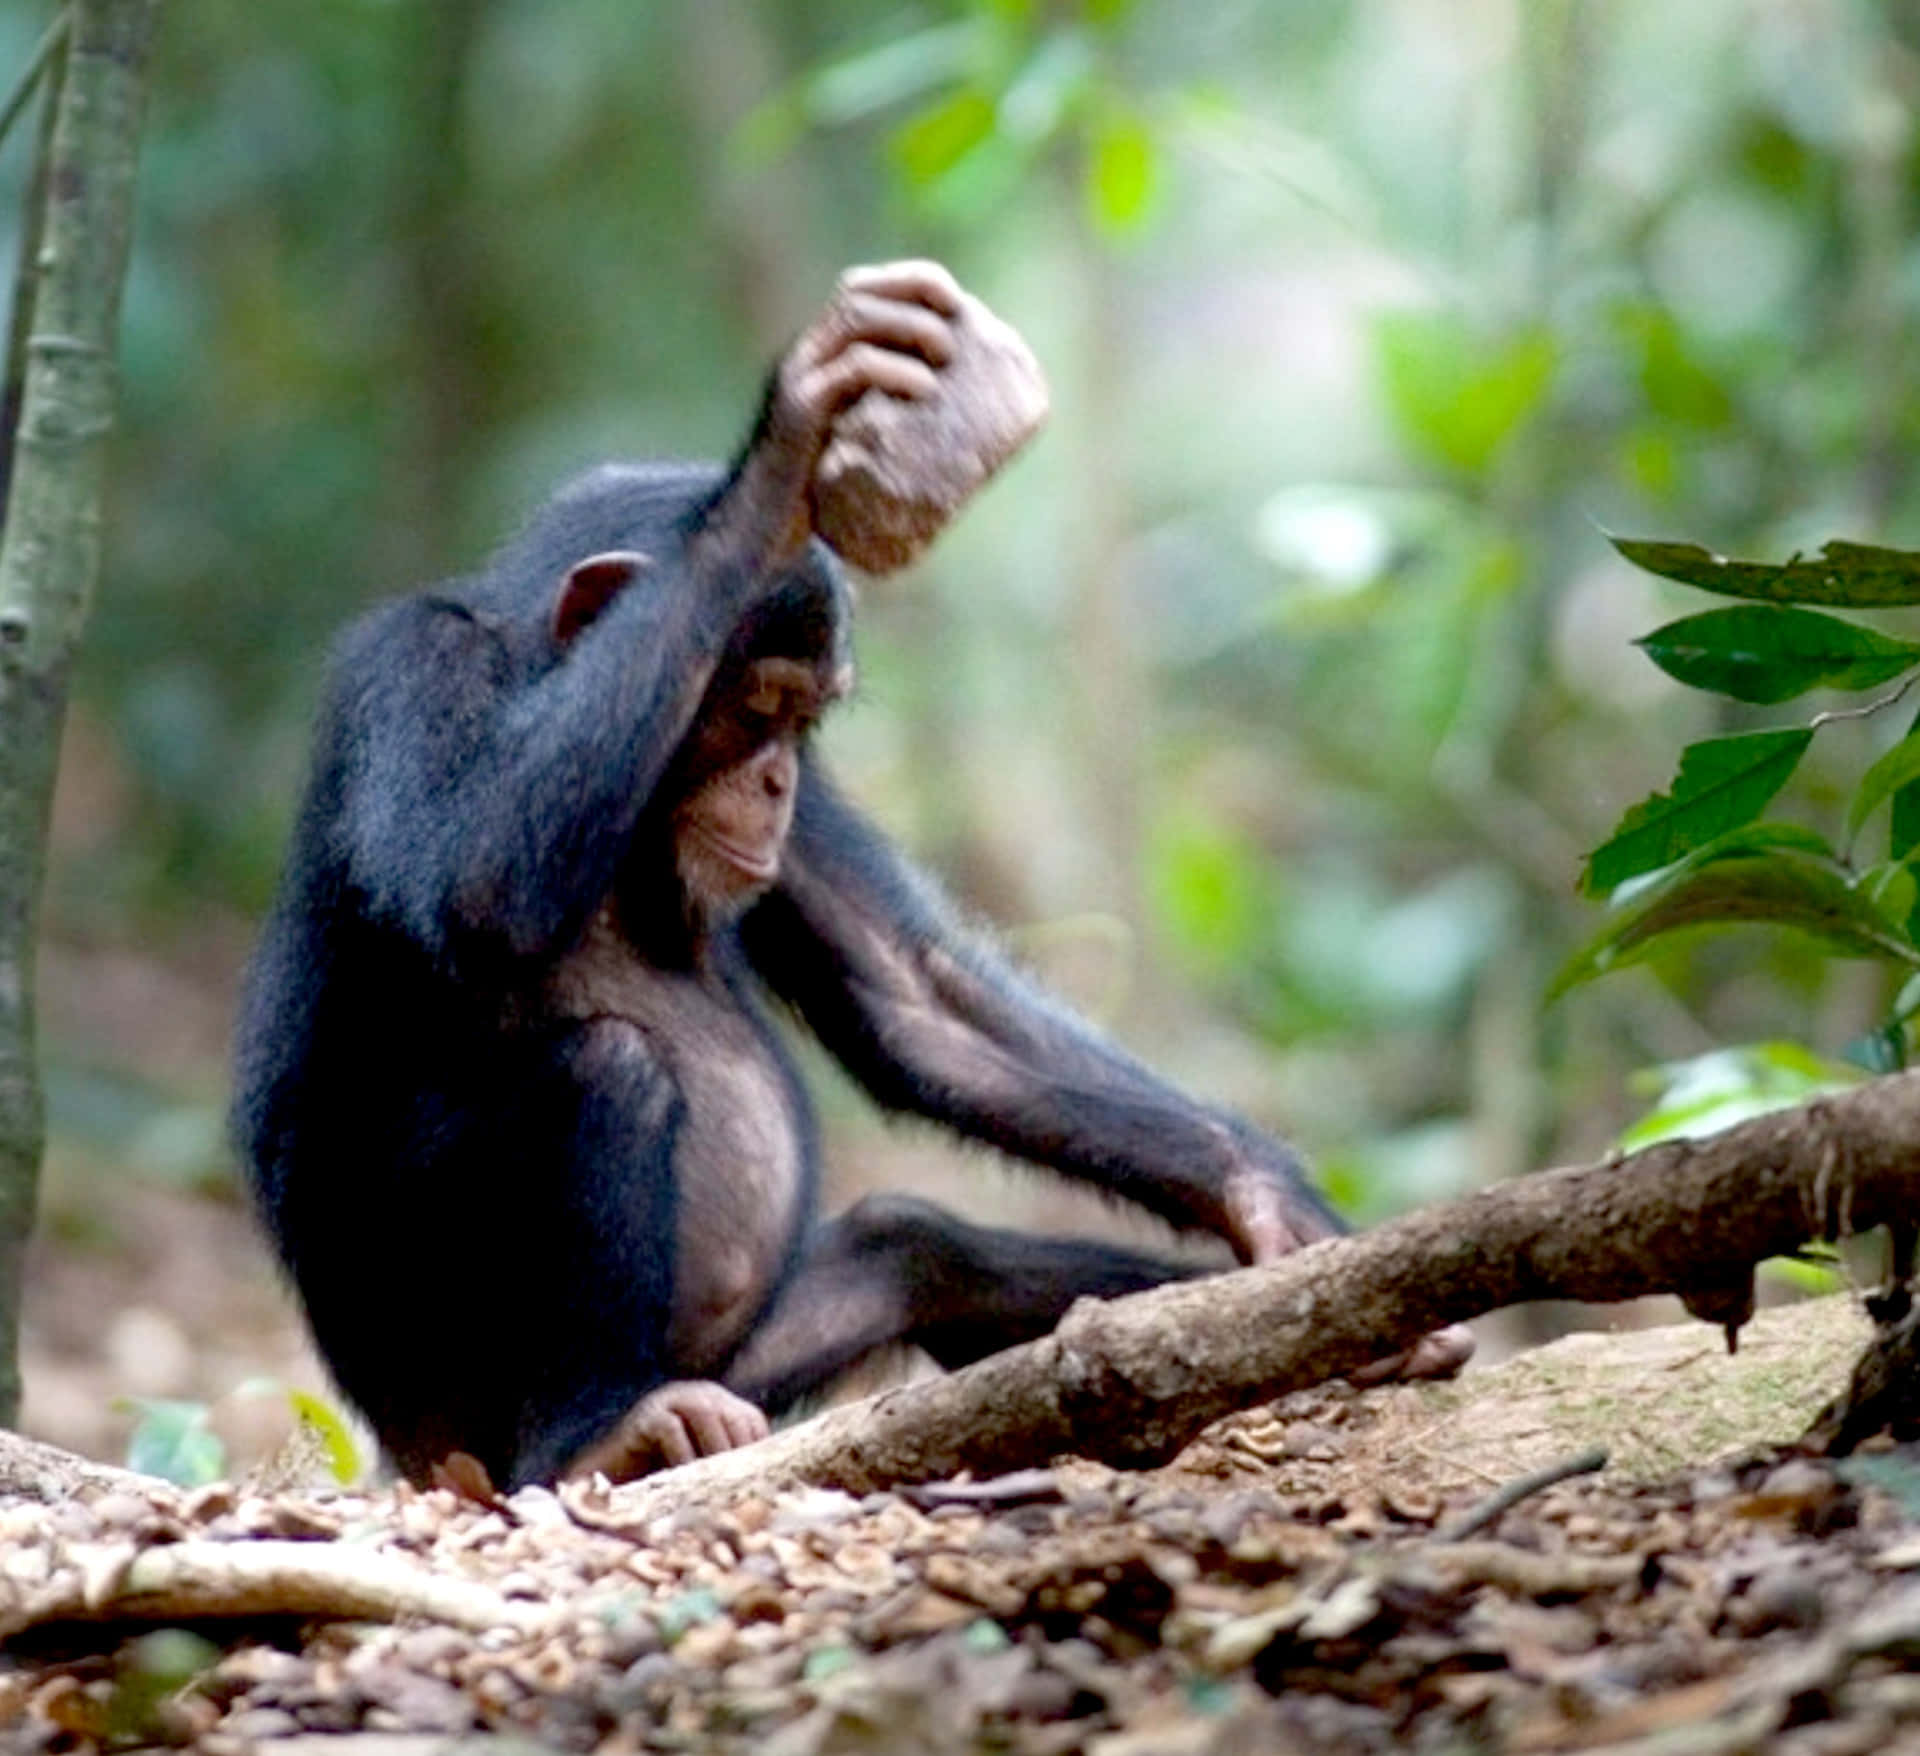 Happy Chimpanzee Chilling in the Tree